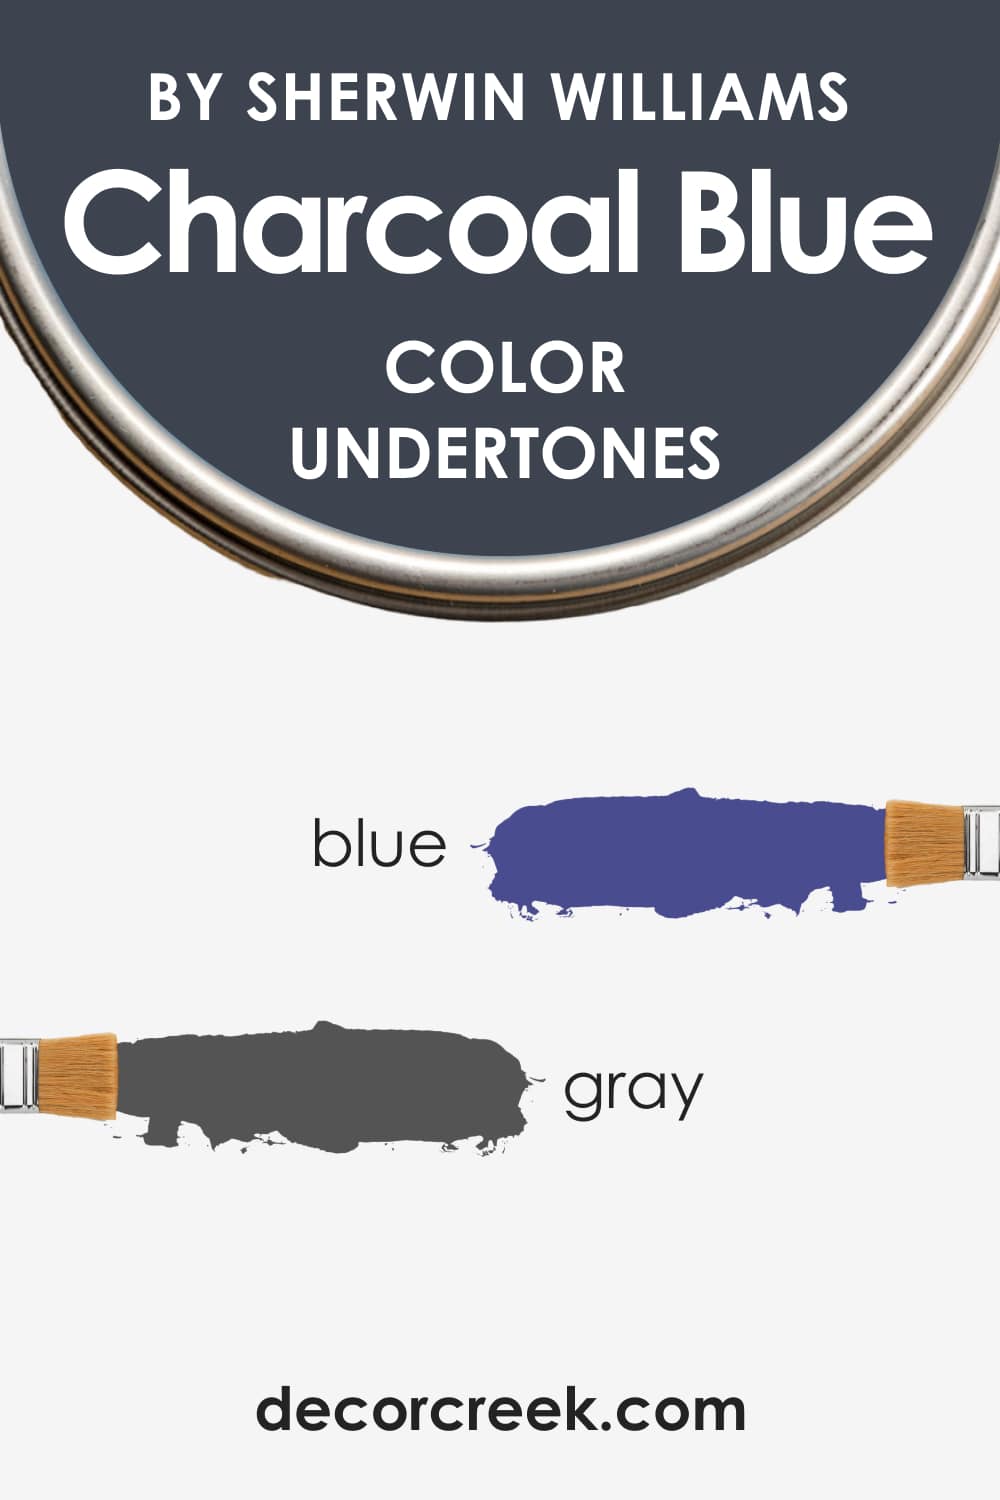 What Undertones Does Sherwin-Williams Charcoal Blue Have?